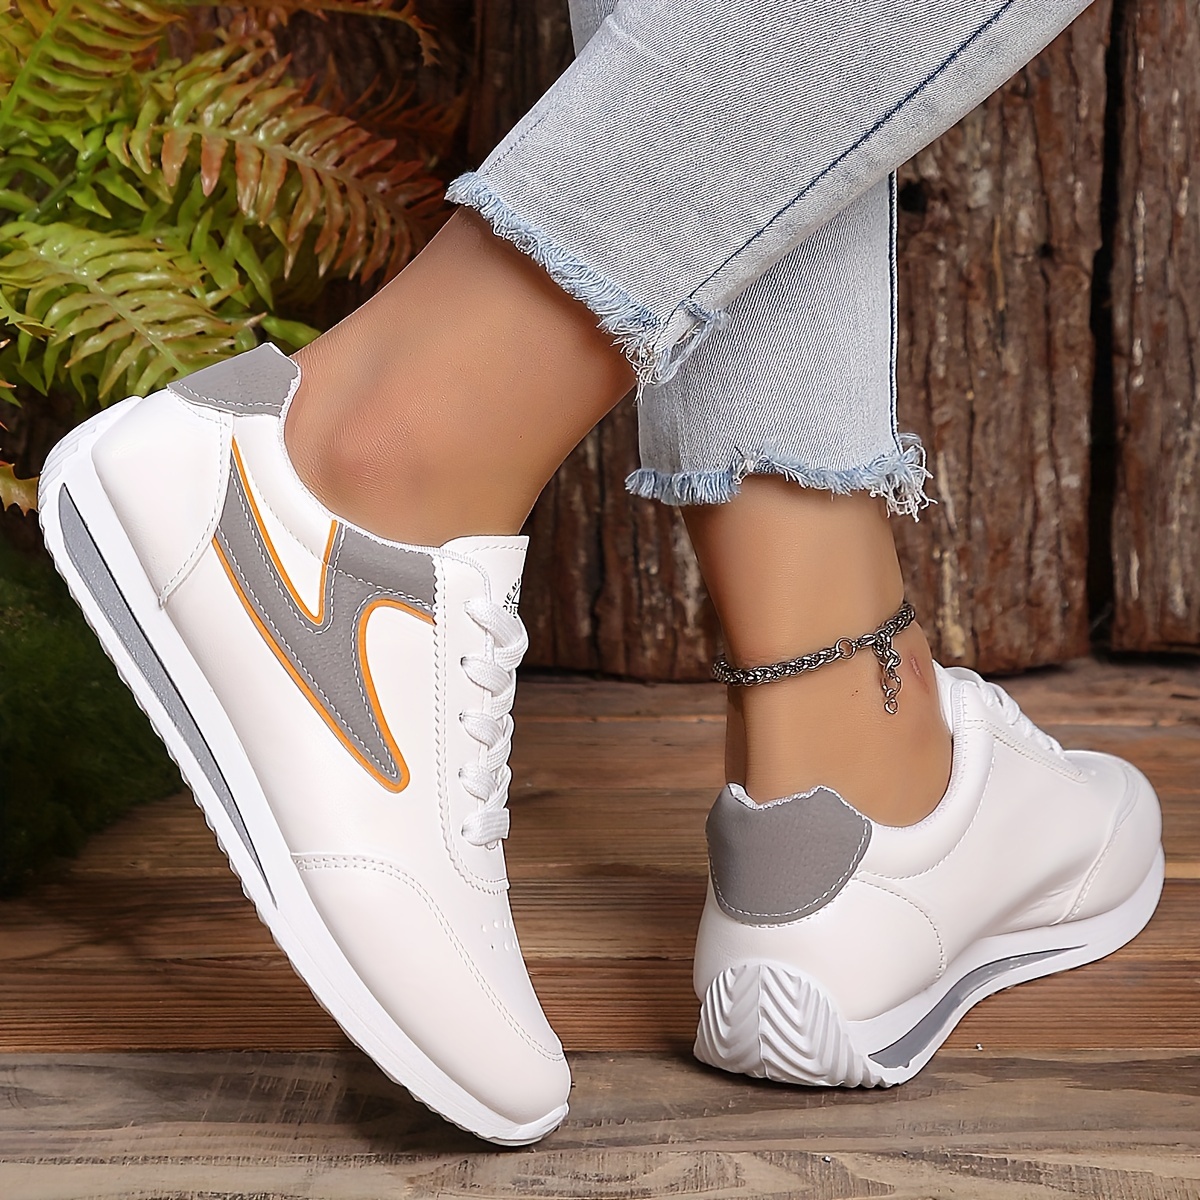 simple flat sneakers women s casual lace outdoor shoes details 0